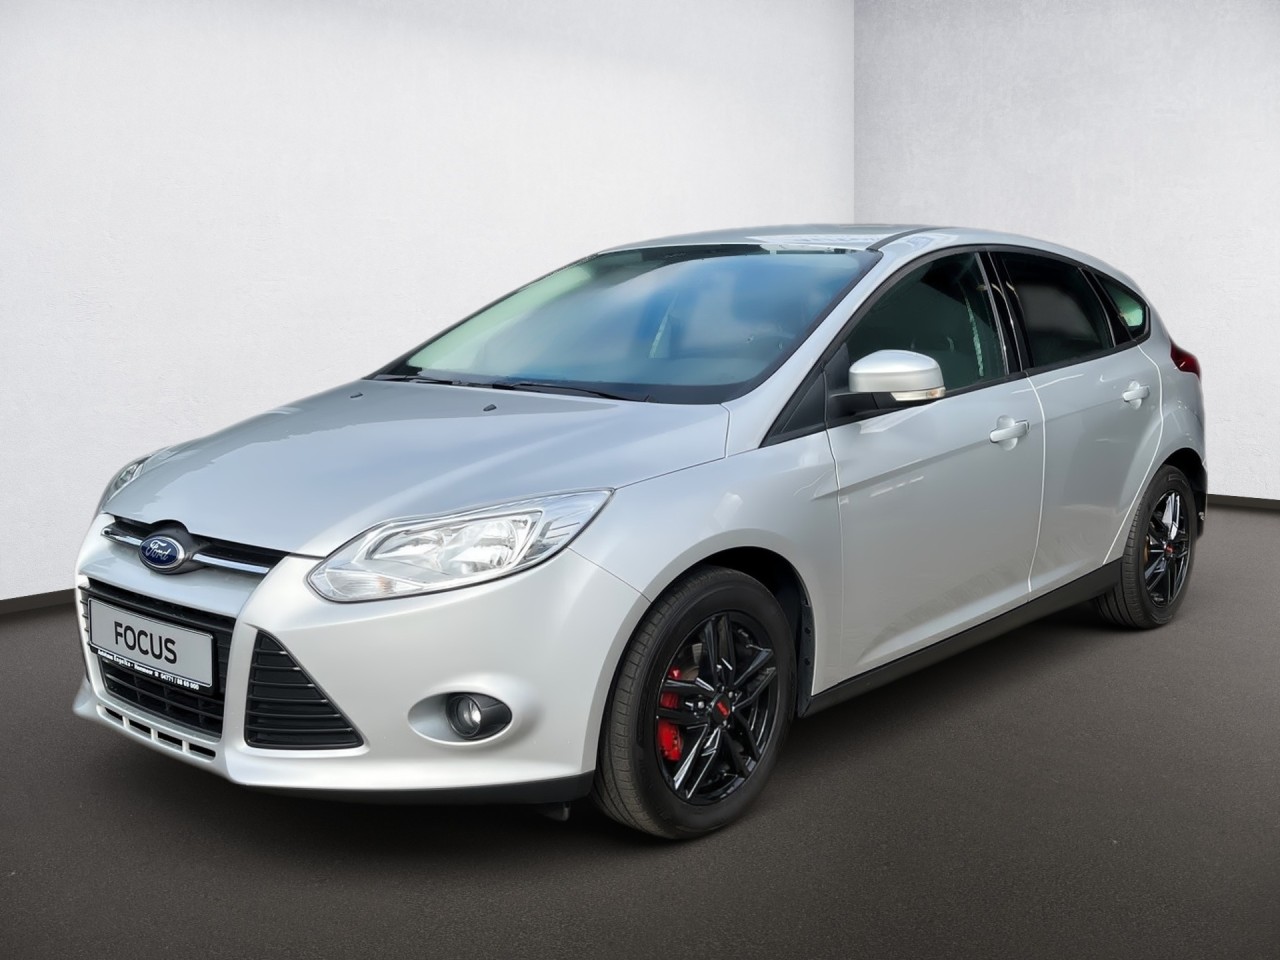 Ford Focus Limousine Sync Edition